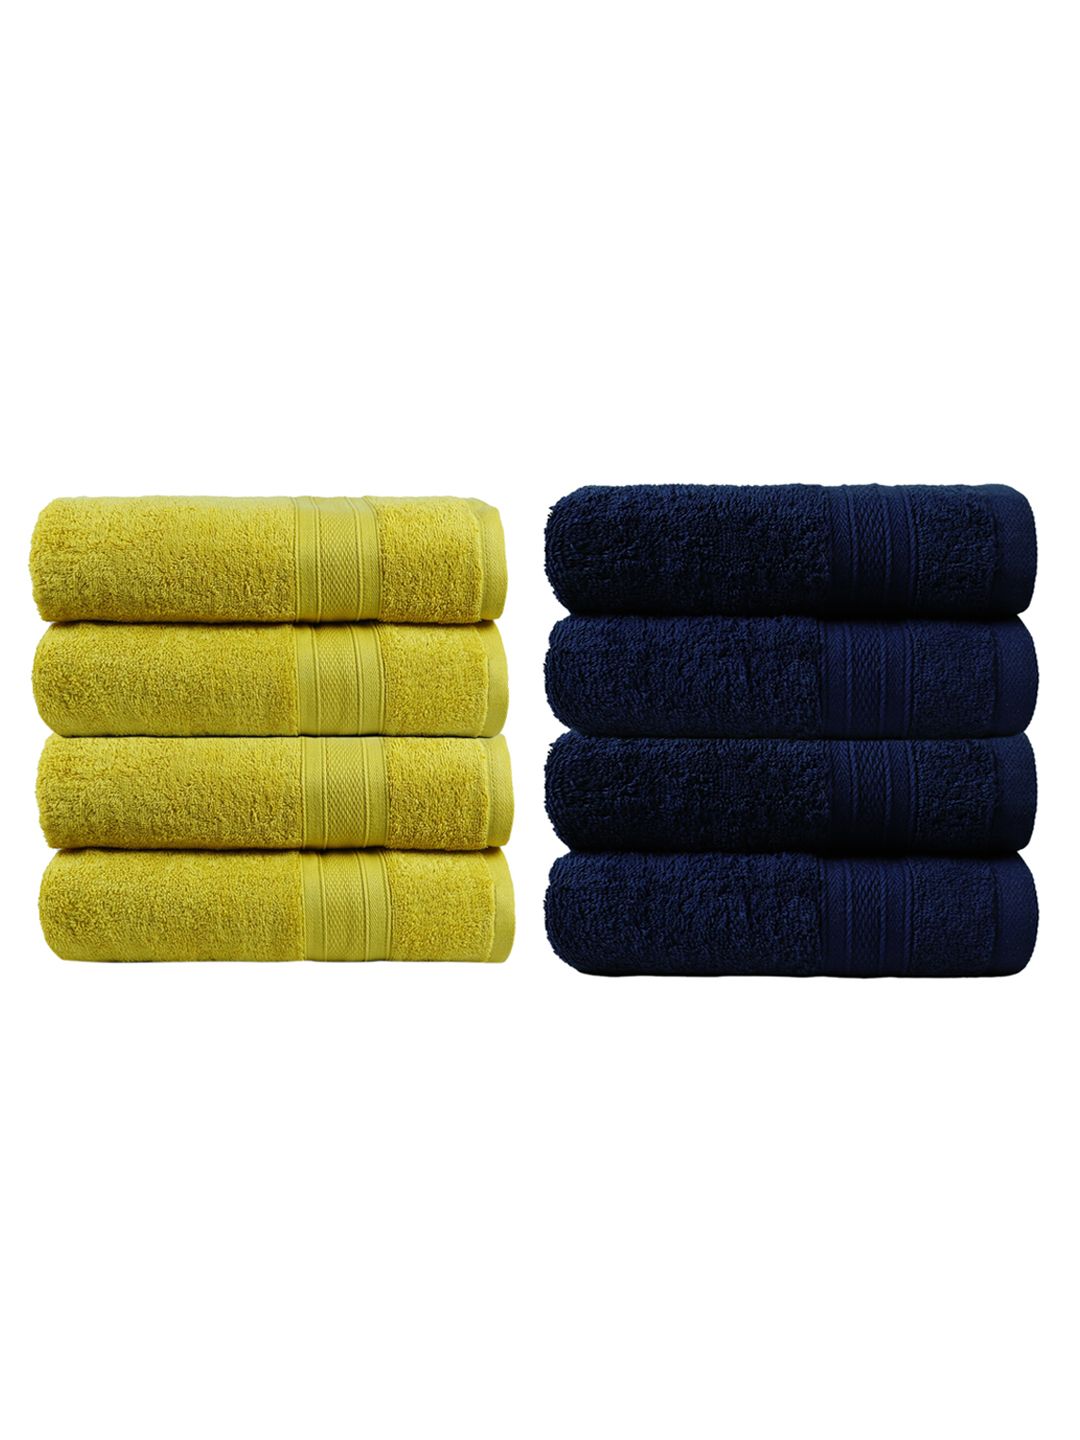 Trident Mustard Yellow Set of 4 500 GSM Cotton Bath Towels & Set of 4 Hand Towels Price in India